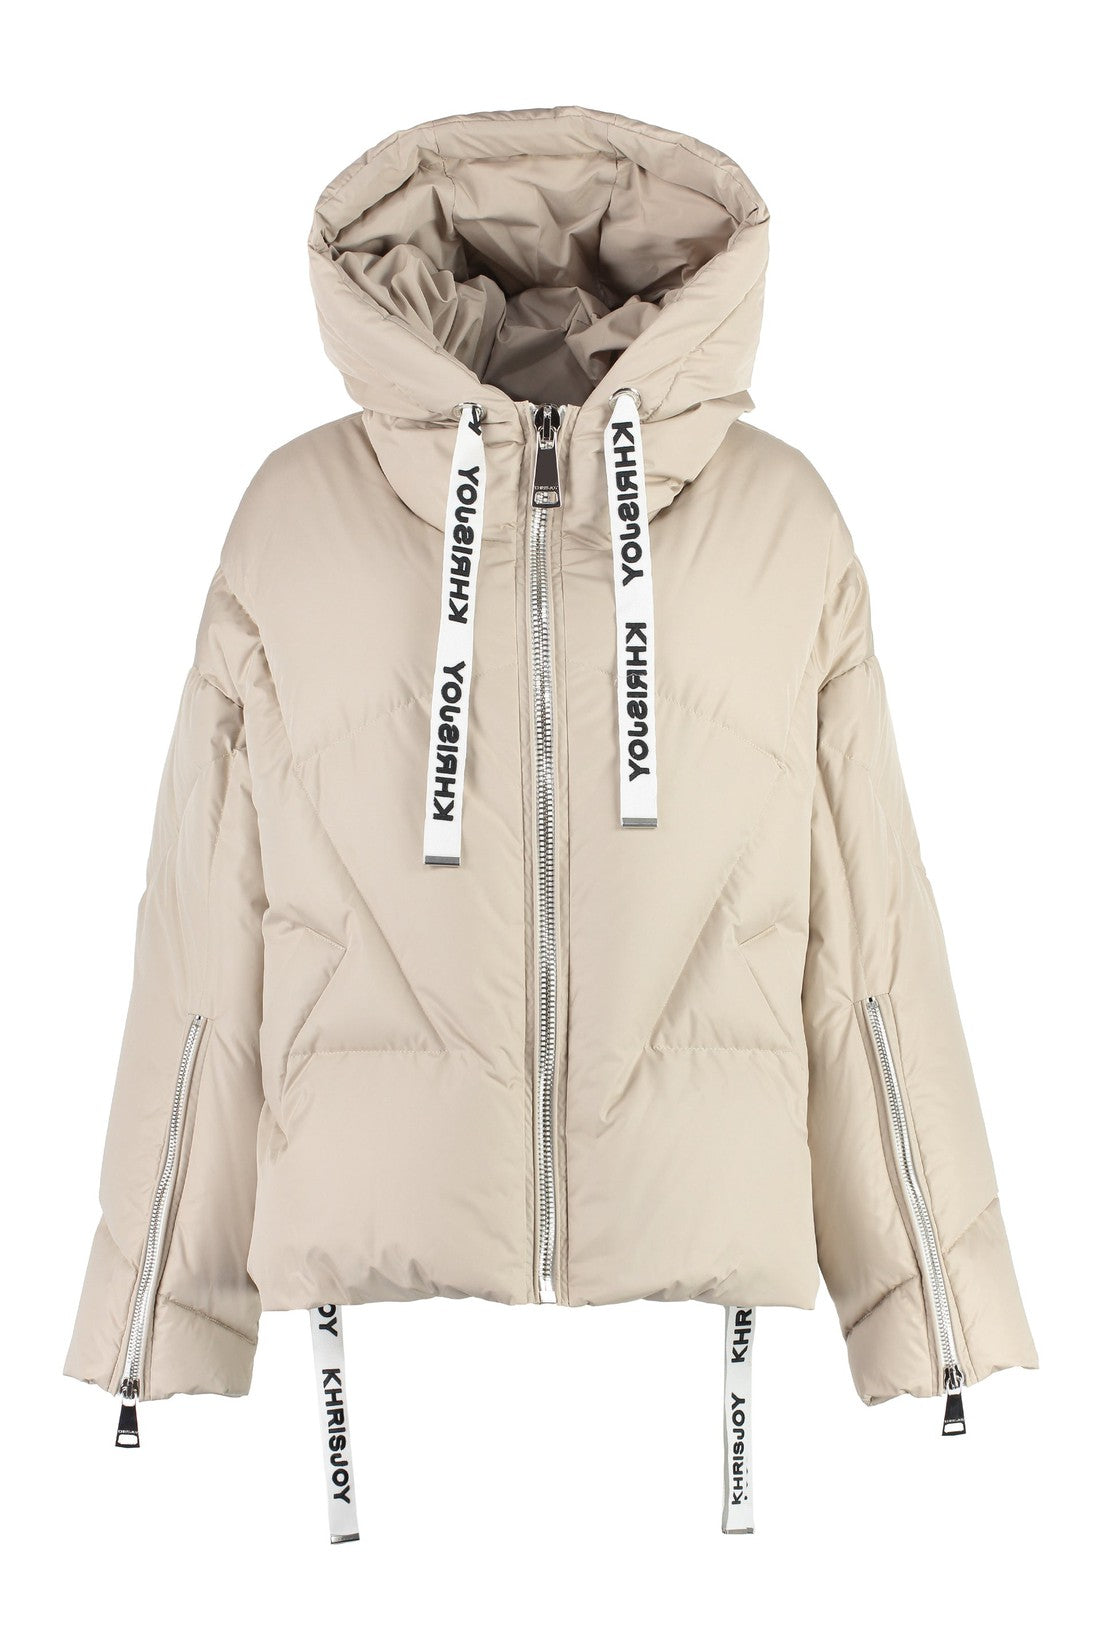 Khrisjoy-OUTLET-SALE-Puff Khris Iconic hooded down jacket-ARCHIVIST